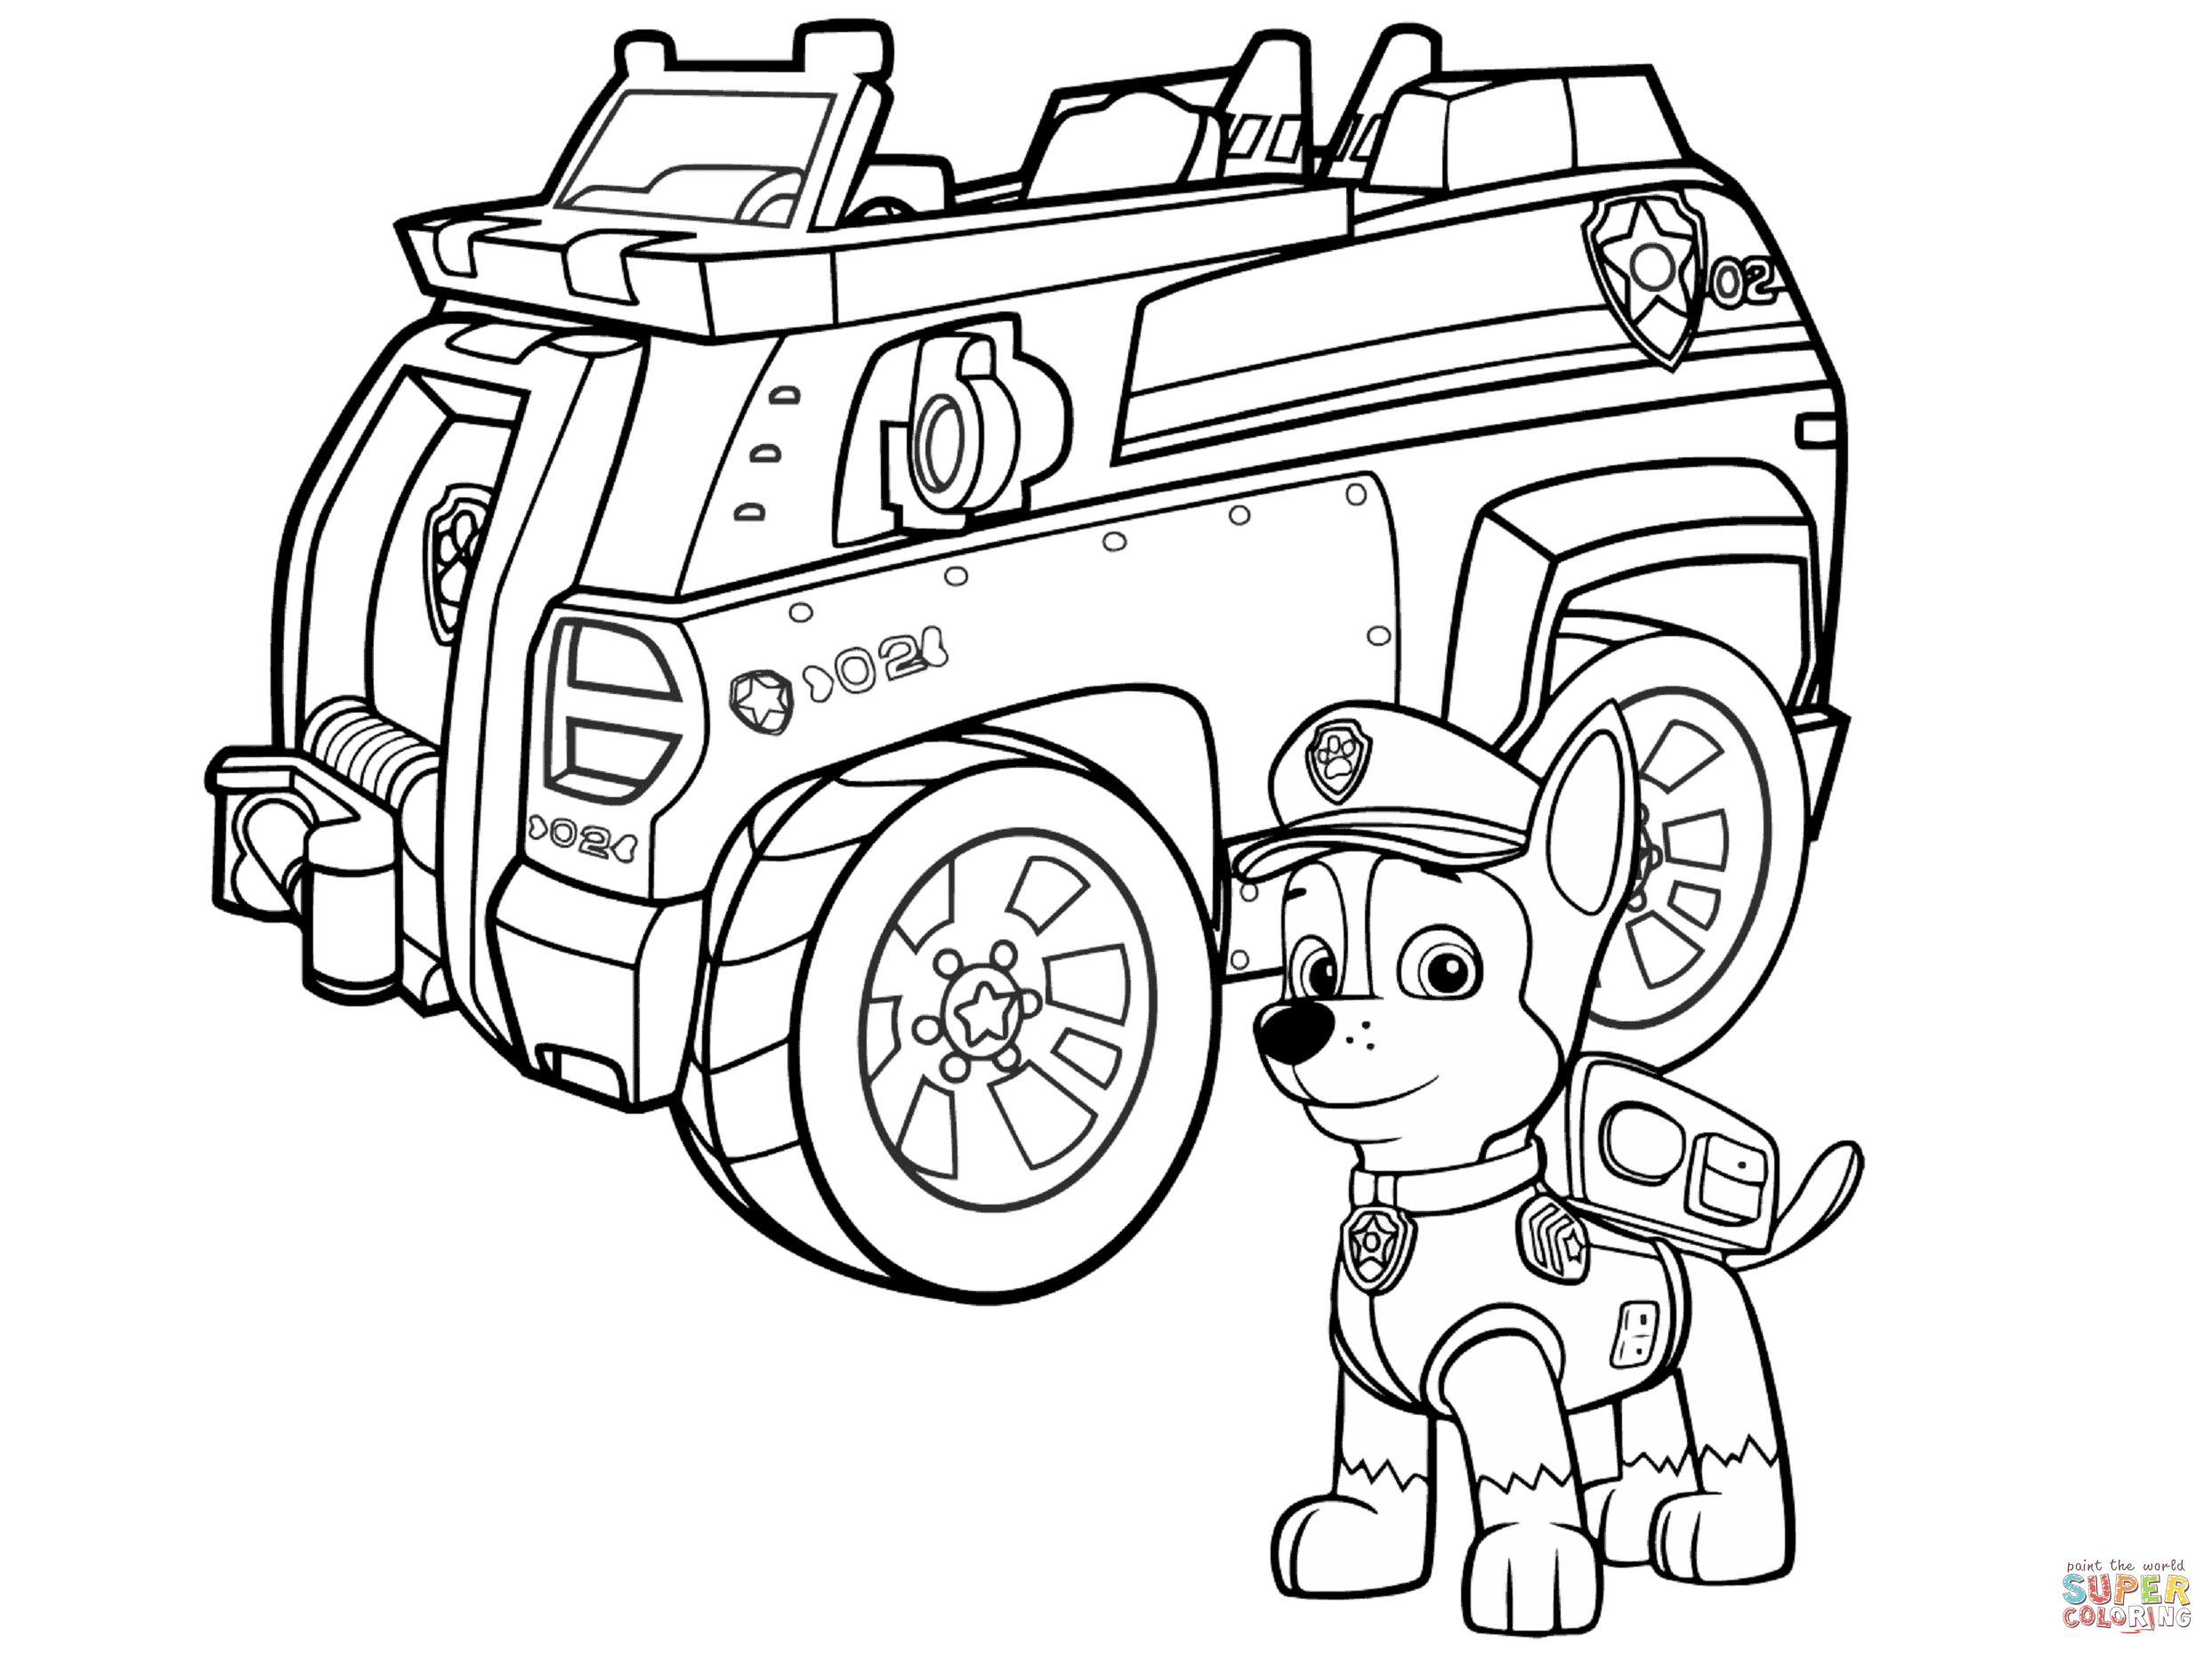 Paw Patrol Chase Police Car coloring page | Free Printable Coloring Pages